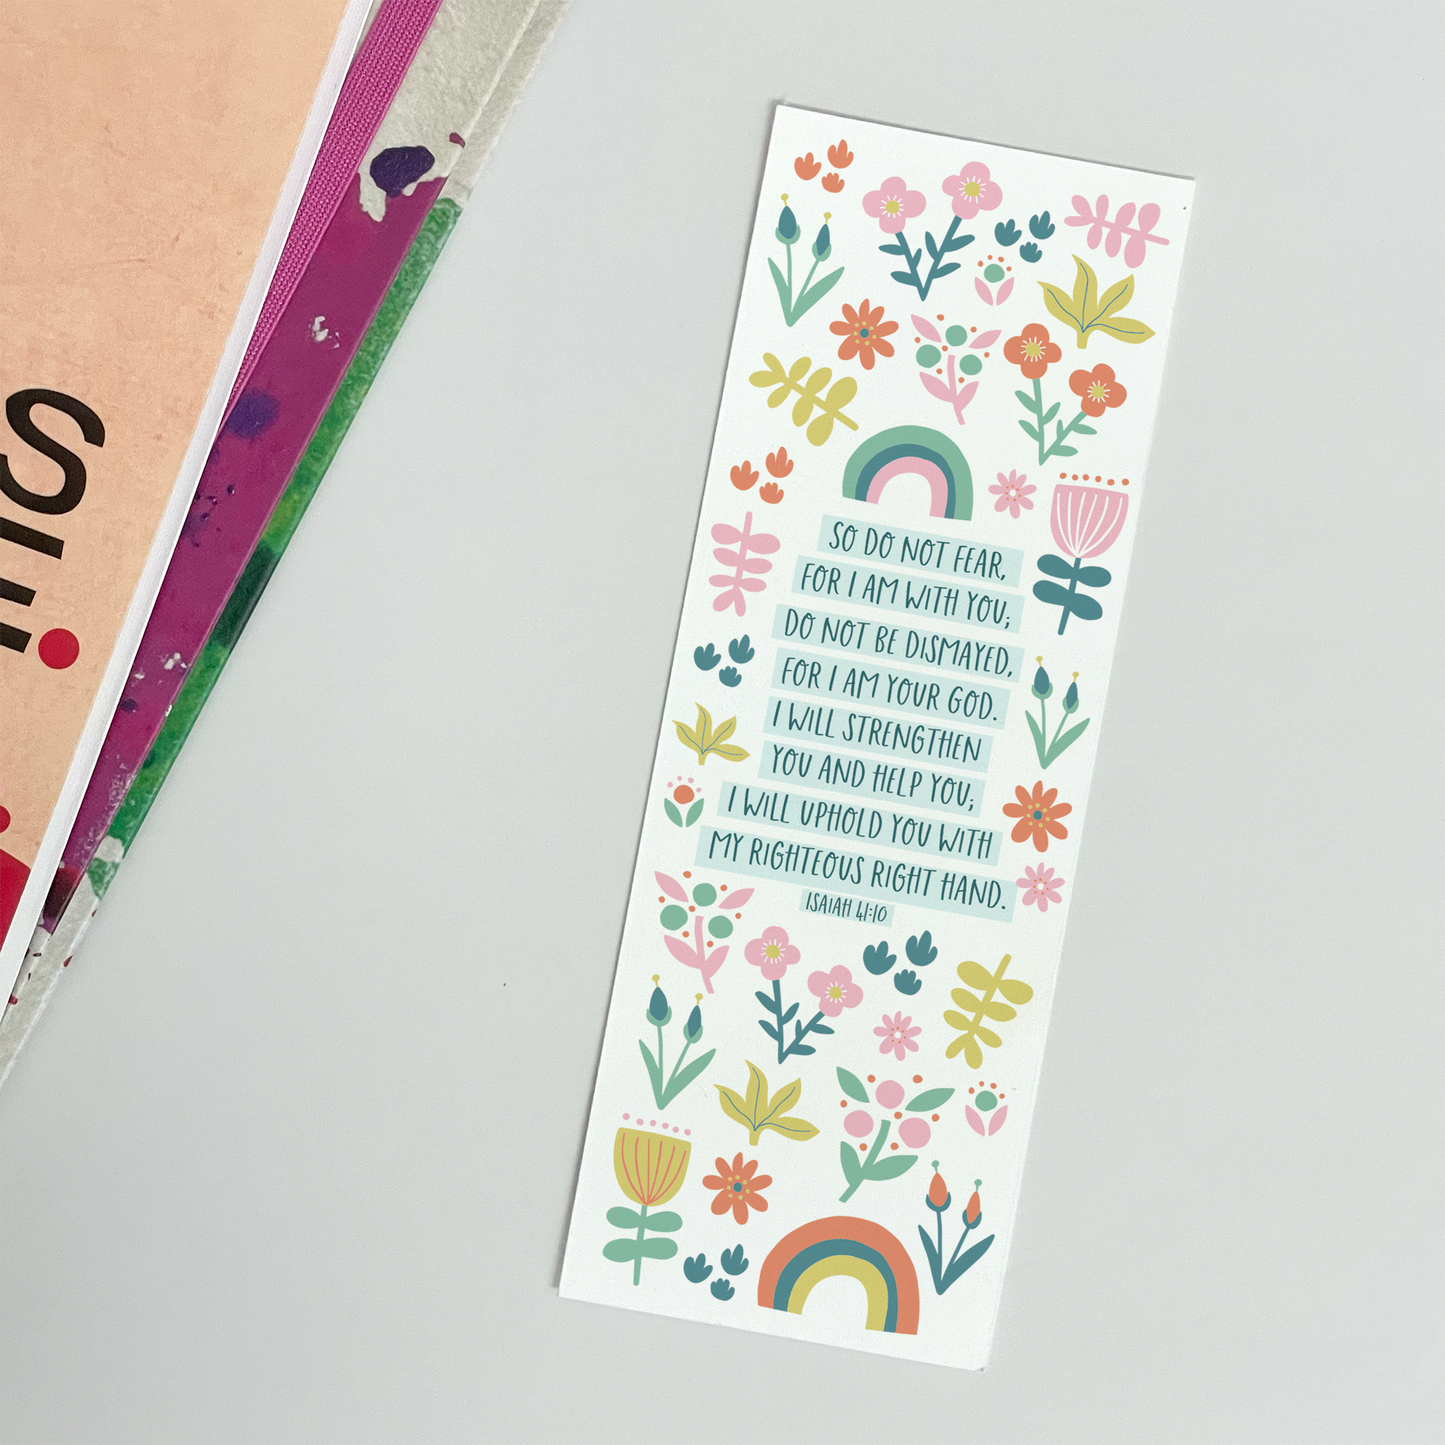 CHRSTIAN BOOKMARK GIFT - ISAIAH 41:10 - THE WEE SPARROW